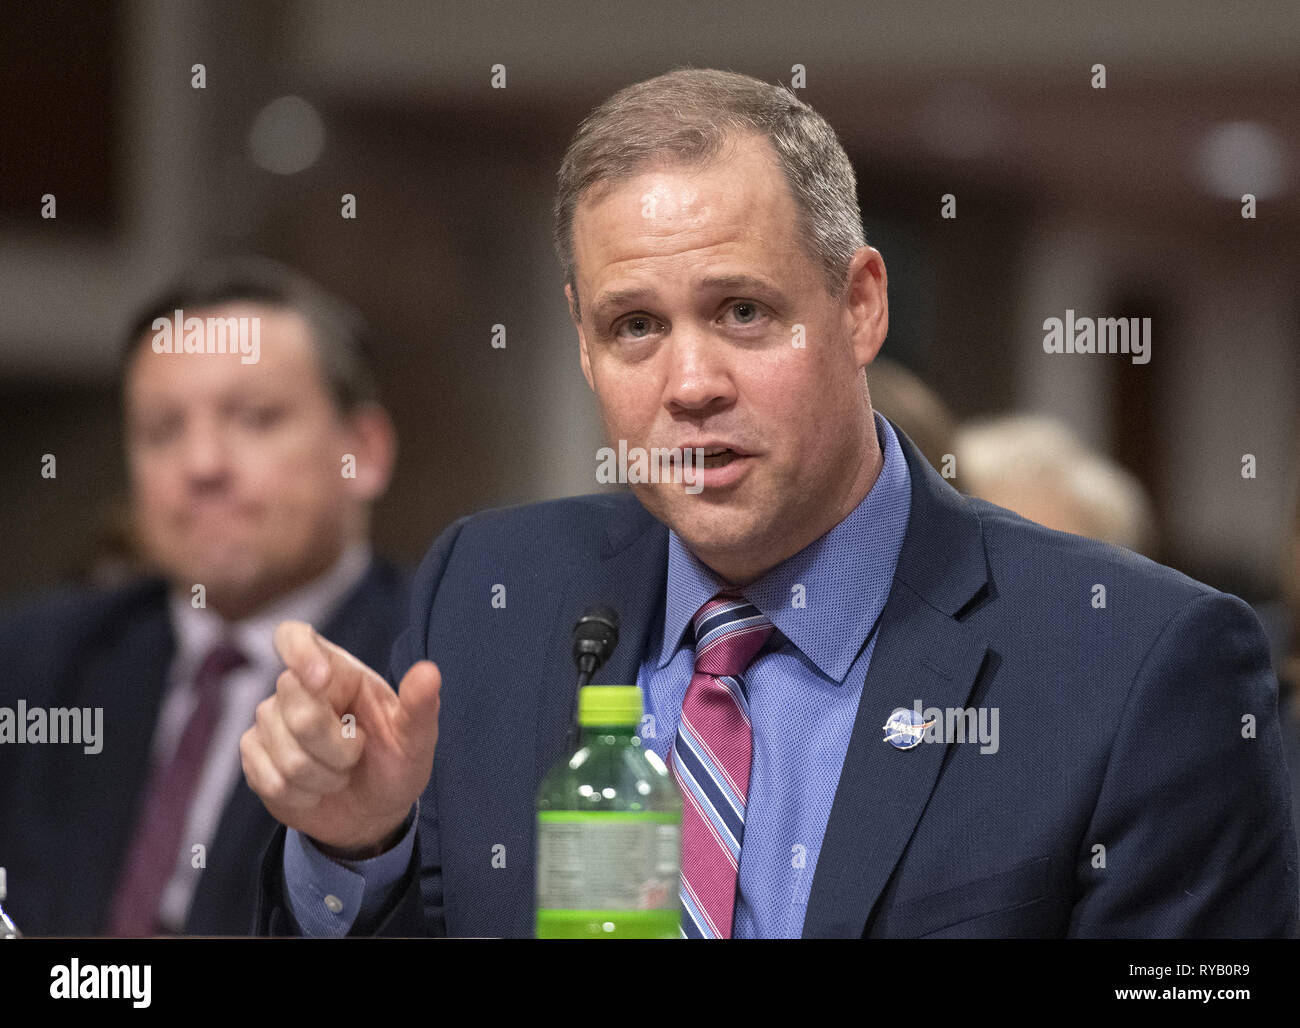 March 13, 2019 - Washington, District of Columbia, U.S. - Jim Bridenstine, Administrator, National Aeronautics and Space Administration, testifies before the United States Senate Committee on Commerce, Science, and Transportation on ''The New Space Race: Ensuring U.S. Global Leadership on the Final Frontier'' on Capitol Hill in Washington, DC on Wednesday, March 13, 2019  (Credit Image: © Ron Sachs/CNP via ZUMA Wire) Stock Photo